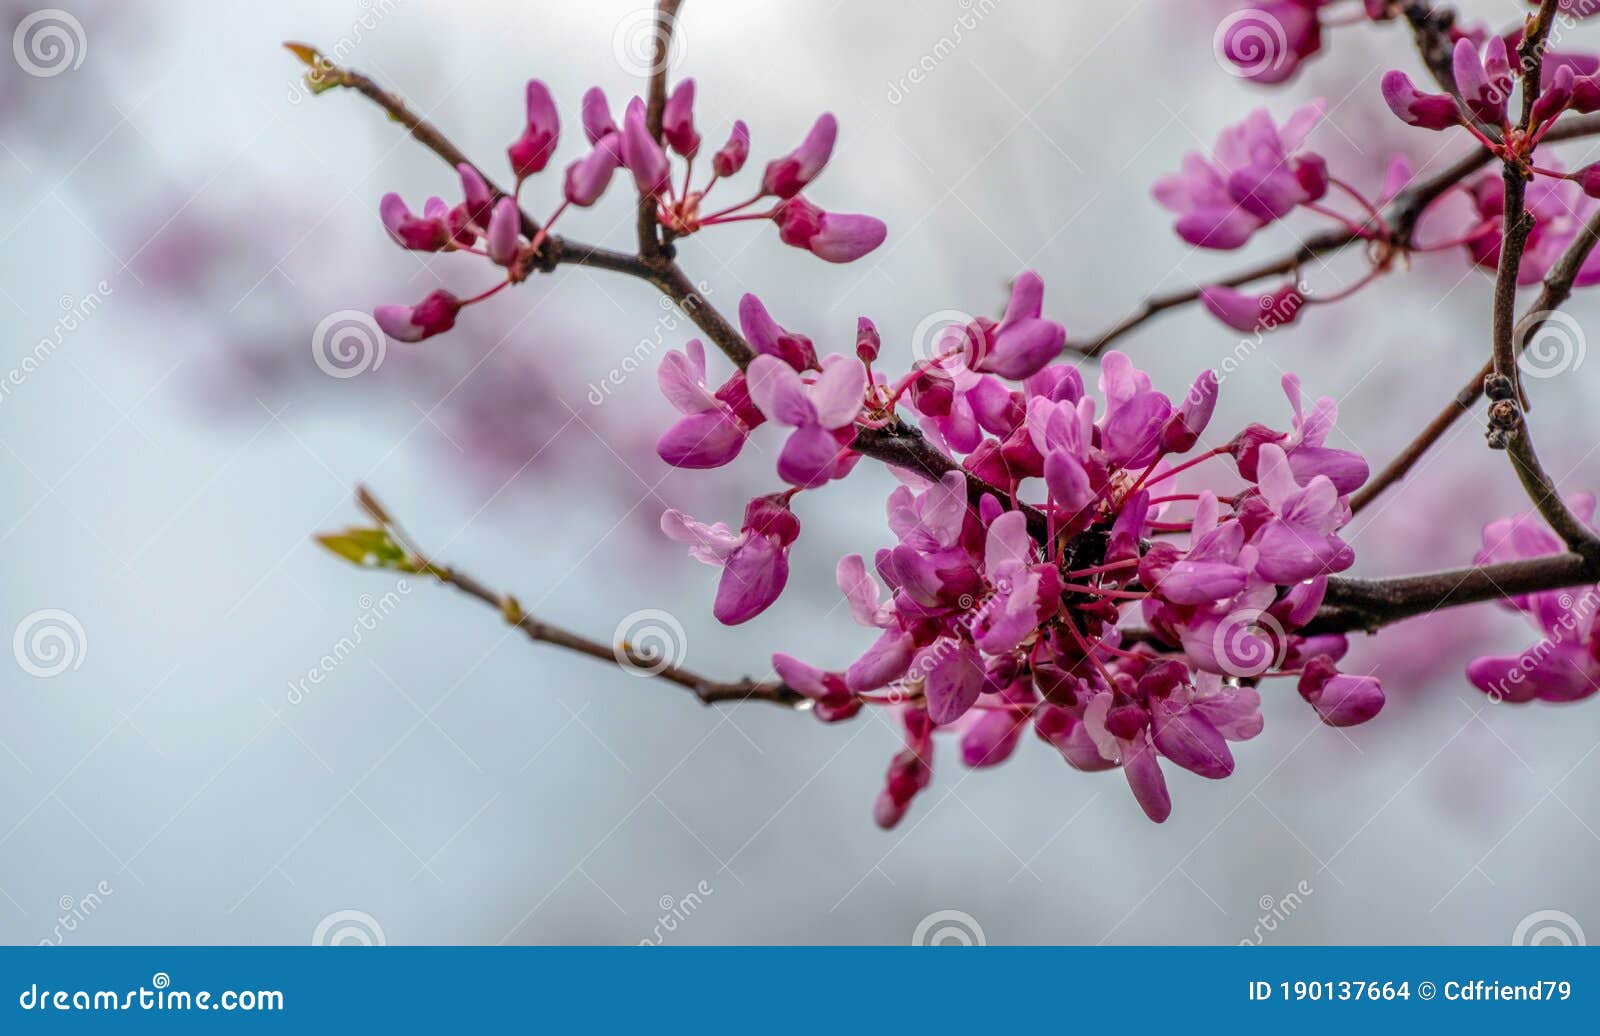 pretty spring blooms on a missouri red bud tree.